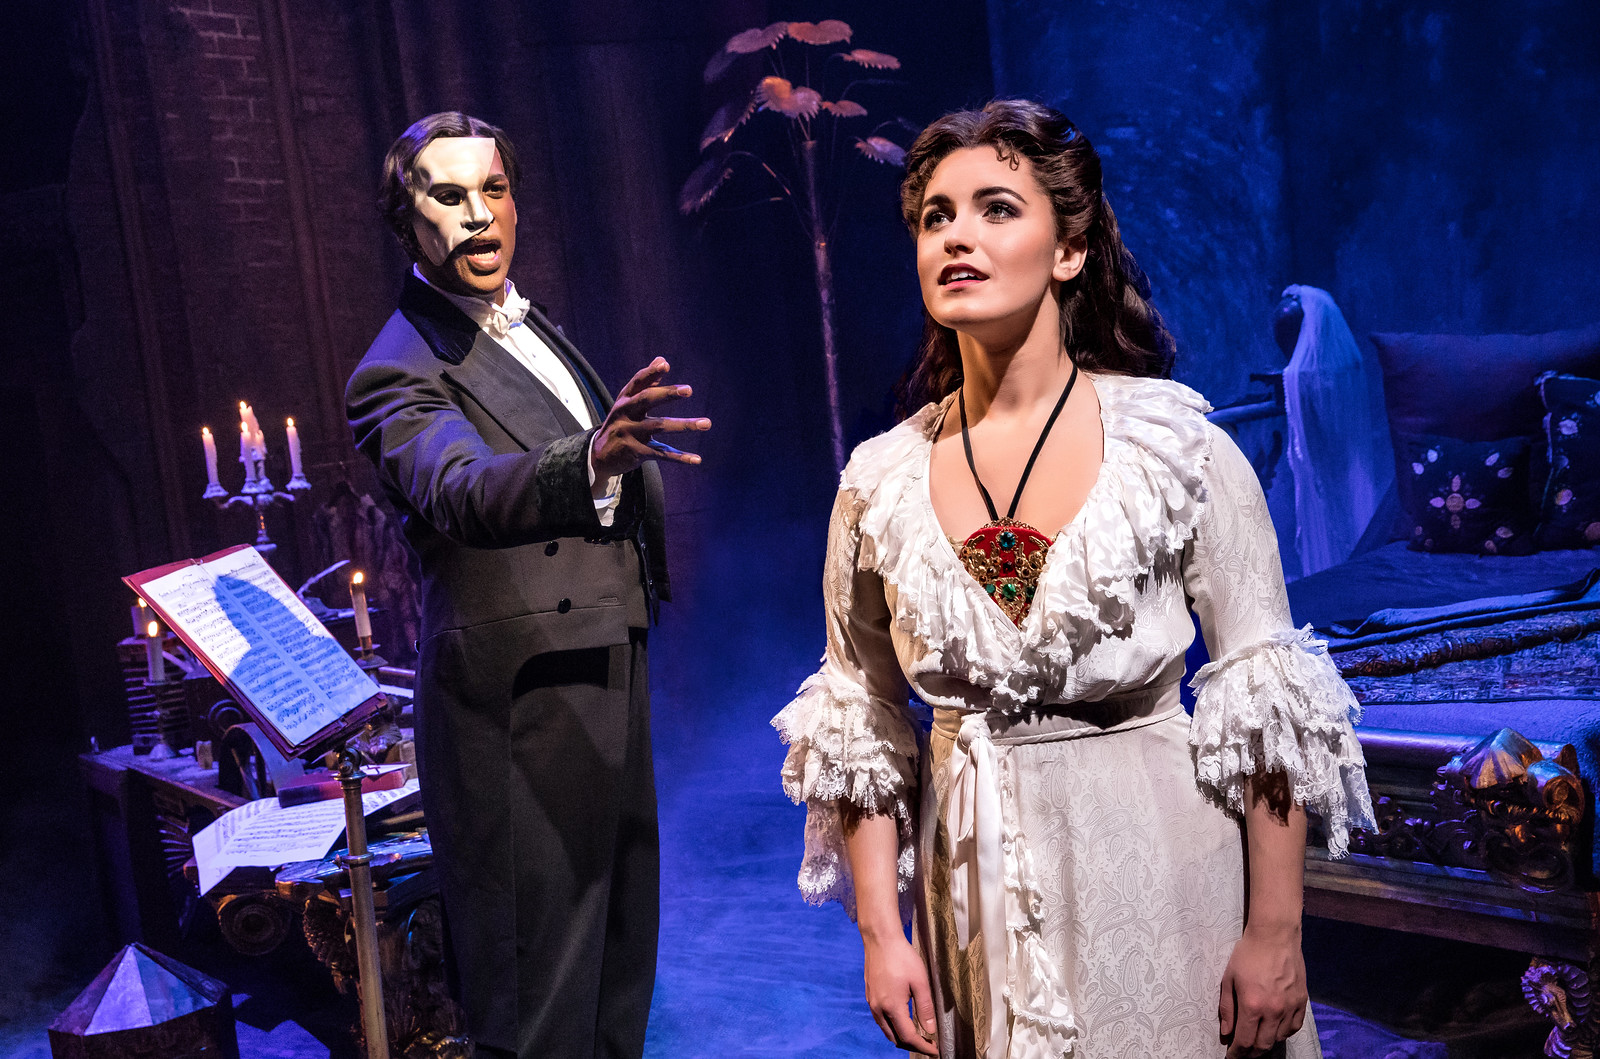 Broadway in Detroit: The Phantom Of The Opera at the Detroit Opera House January 24 - February 3, 2019 | via Wading in Big Shoes